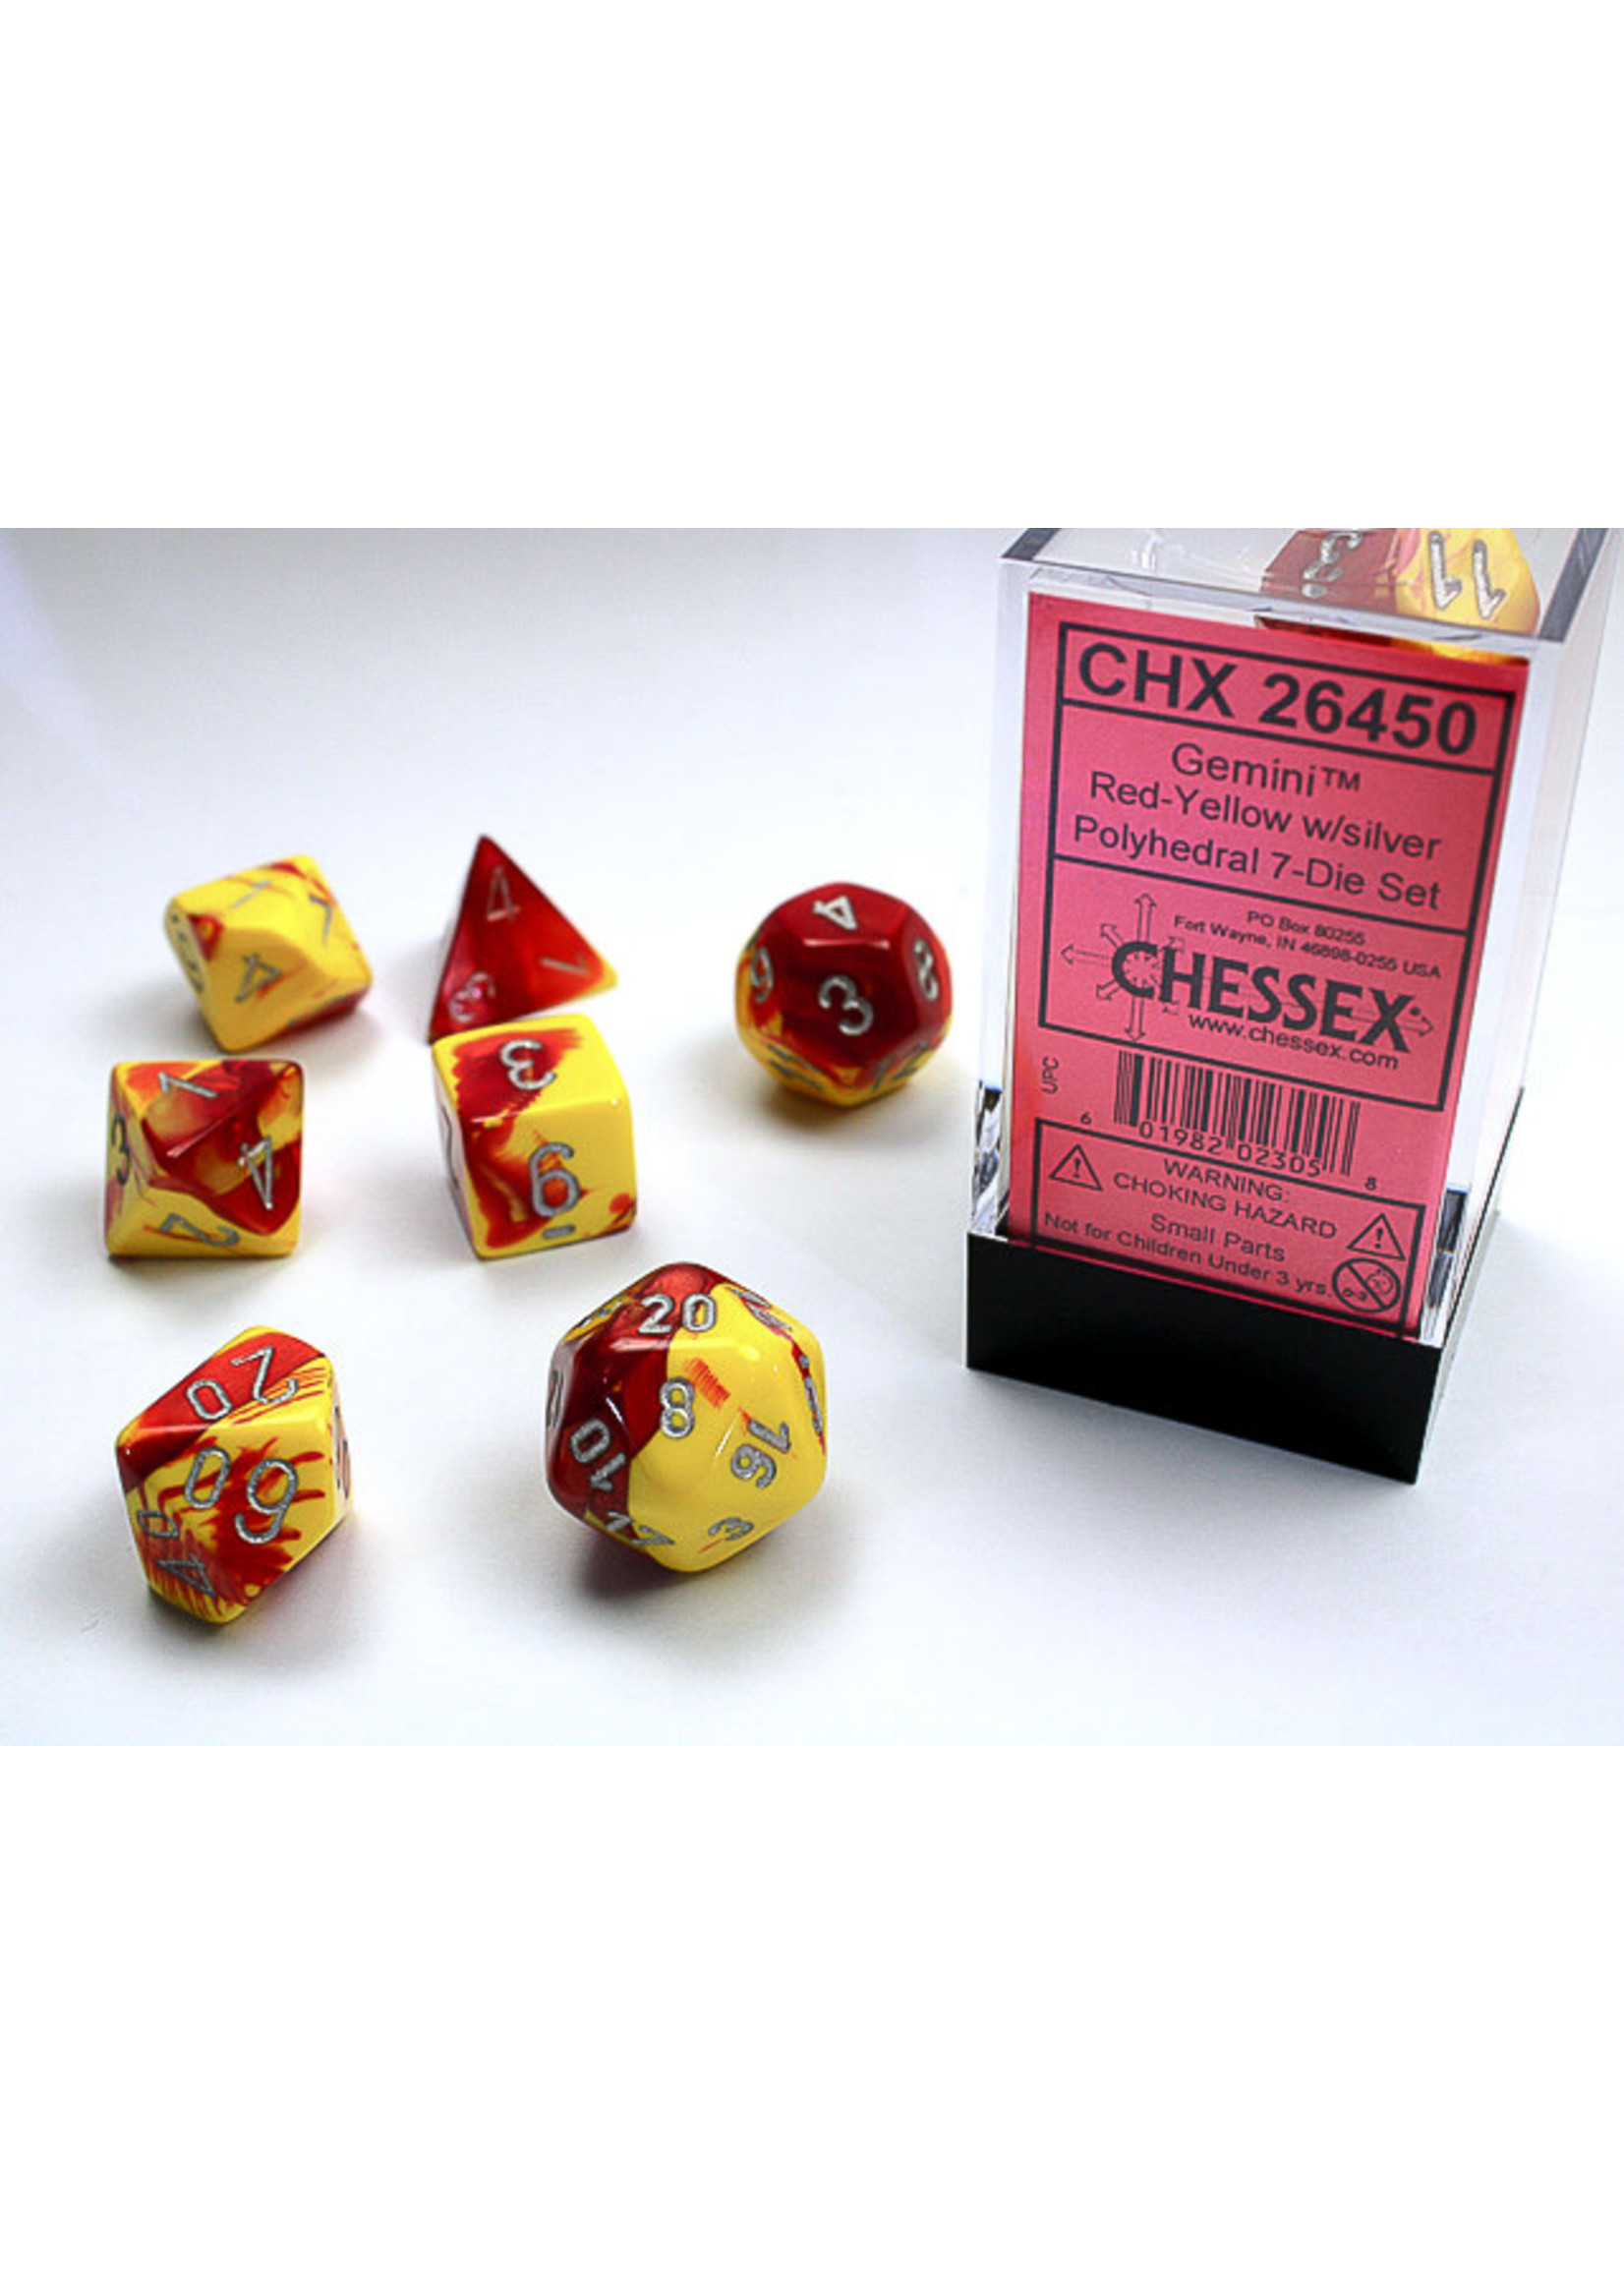 Chessex Gemini Red-Yellow/silver- Set of 7 Polyhedral Dice by Chessex